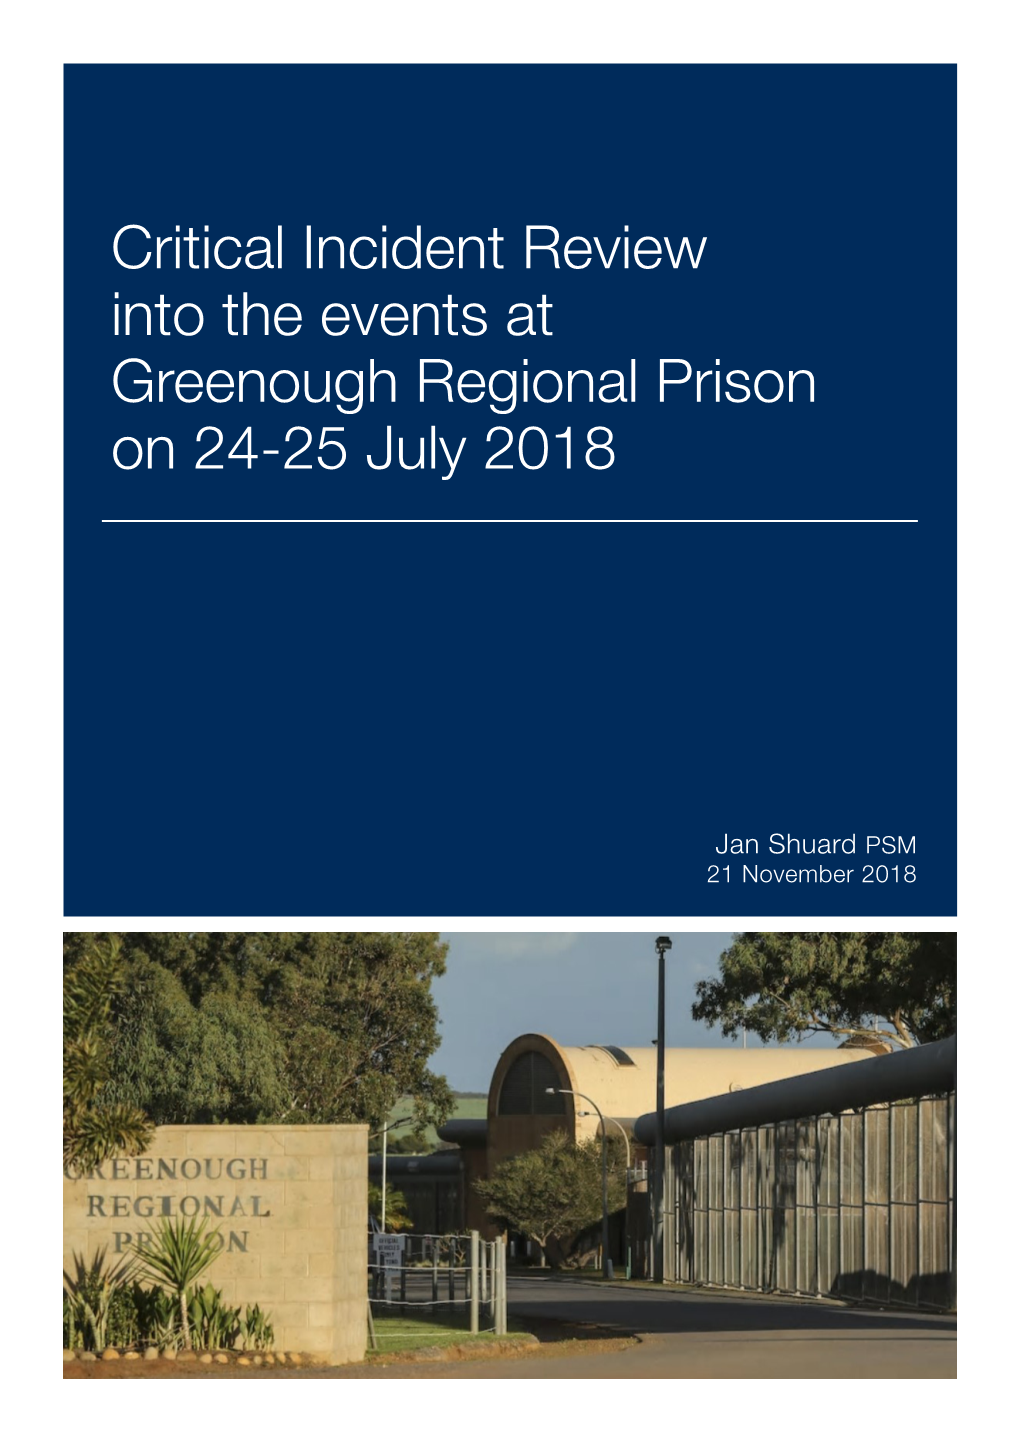 Critical Incident Review Into the Events at Greenough Regional Prison on 24-25 July 2018